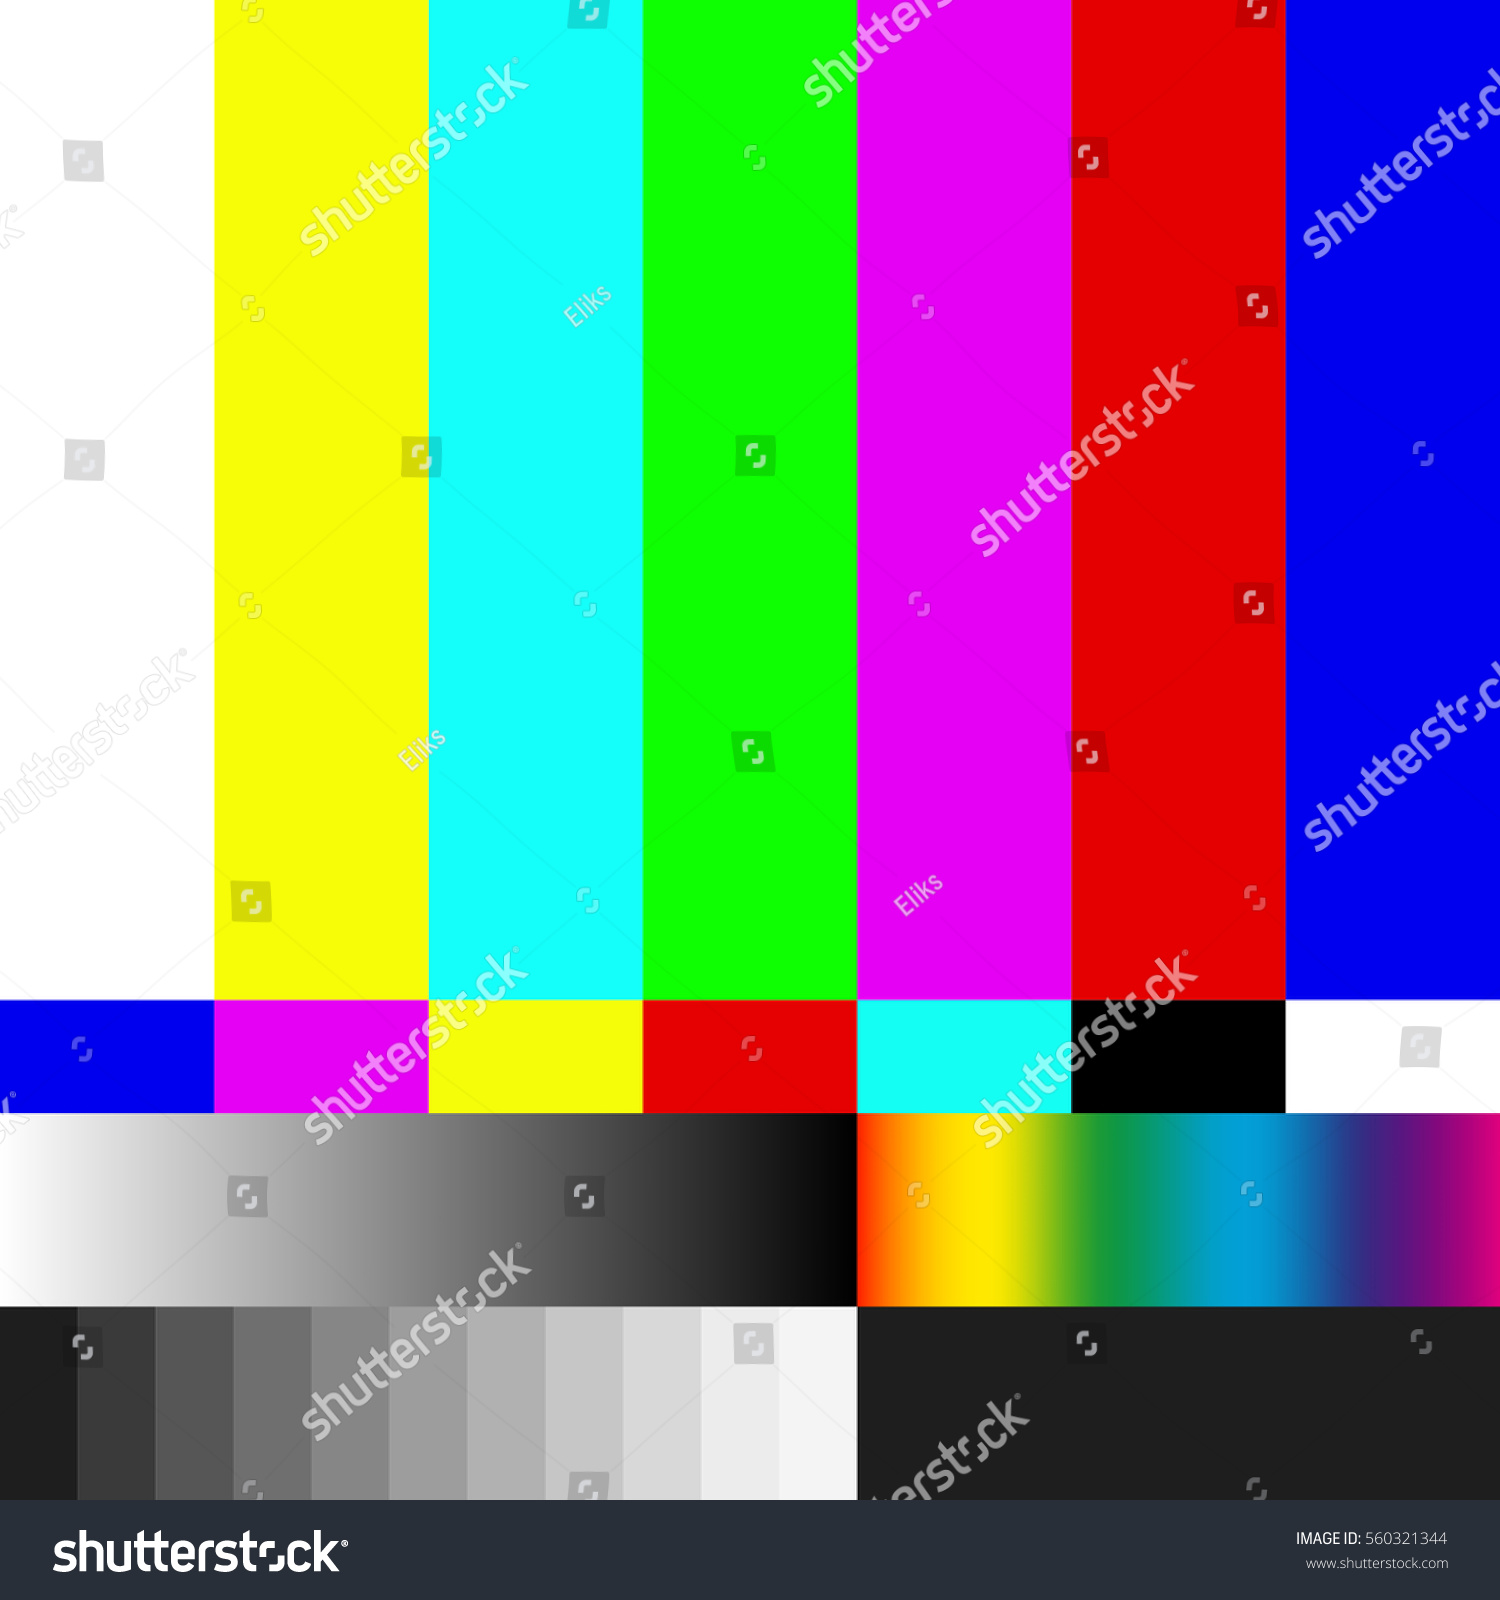 Error on television screen. No signal. Tv pattern signal for test purposes. Test TV screen. EPS 10 vector file included #560321344